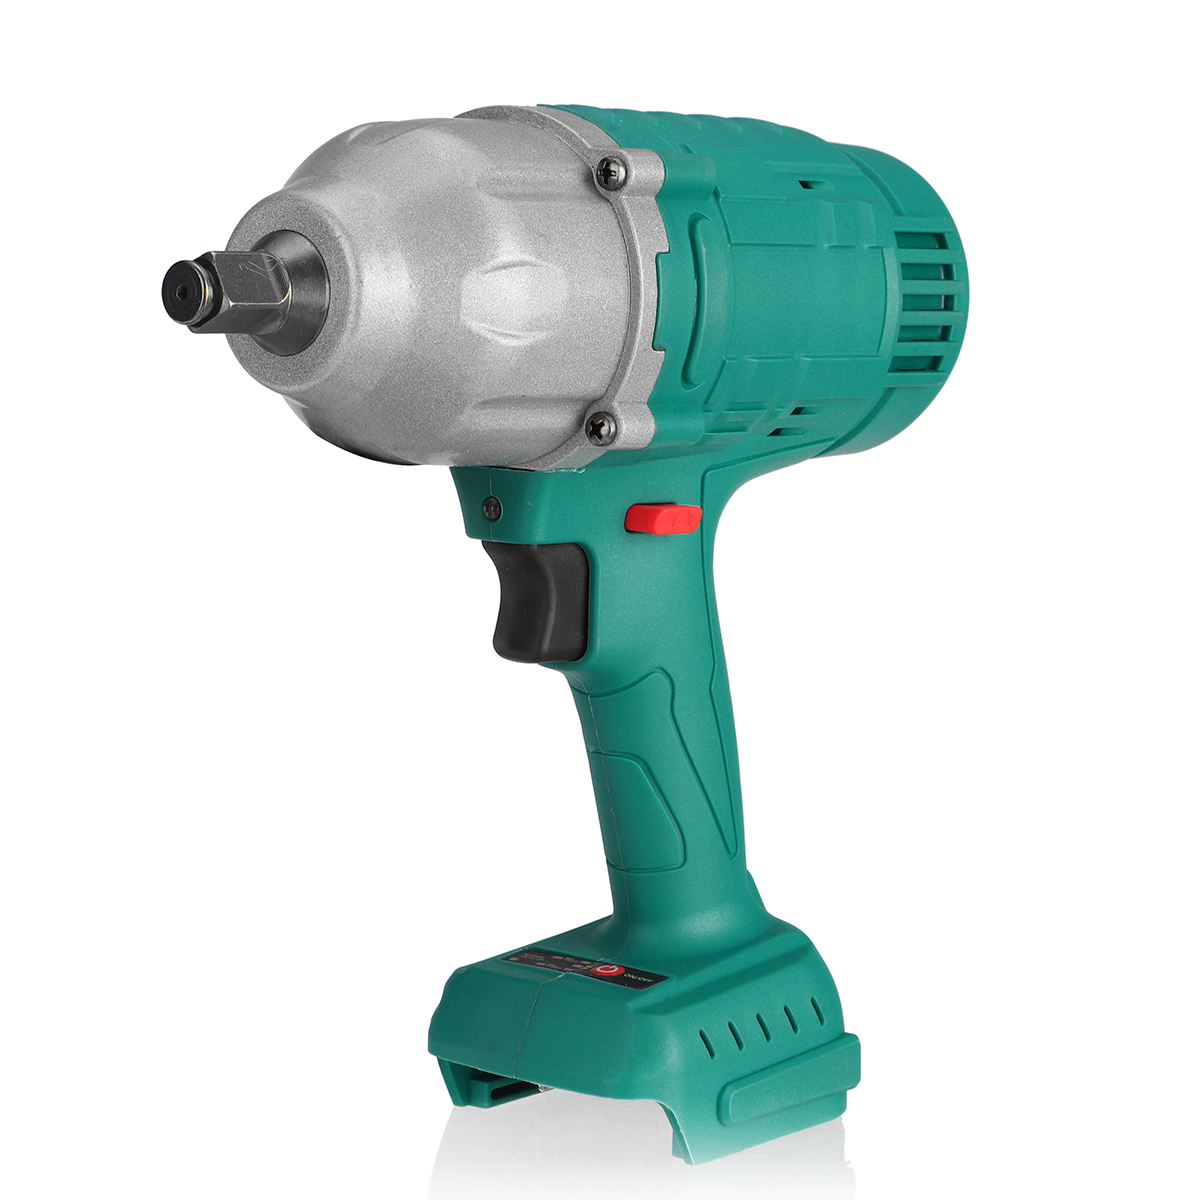 Find BLMIATKO 18V 1900N m Electric Brushless Impact Wrench Rechargeable Woodworking Maintenance Tool for Sale on Gipsybee.com with cryptocurrencies